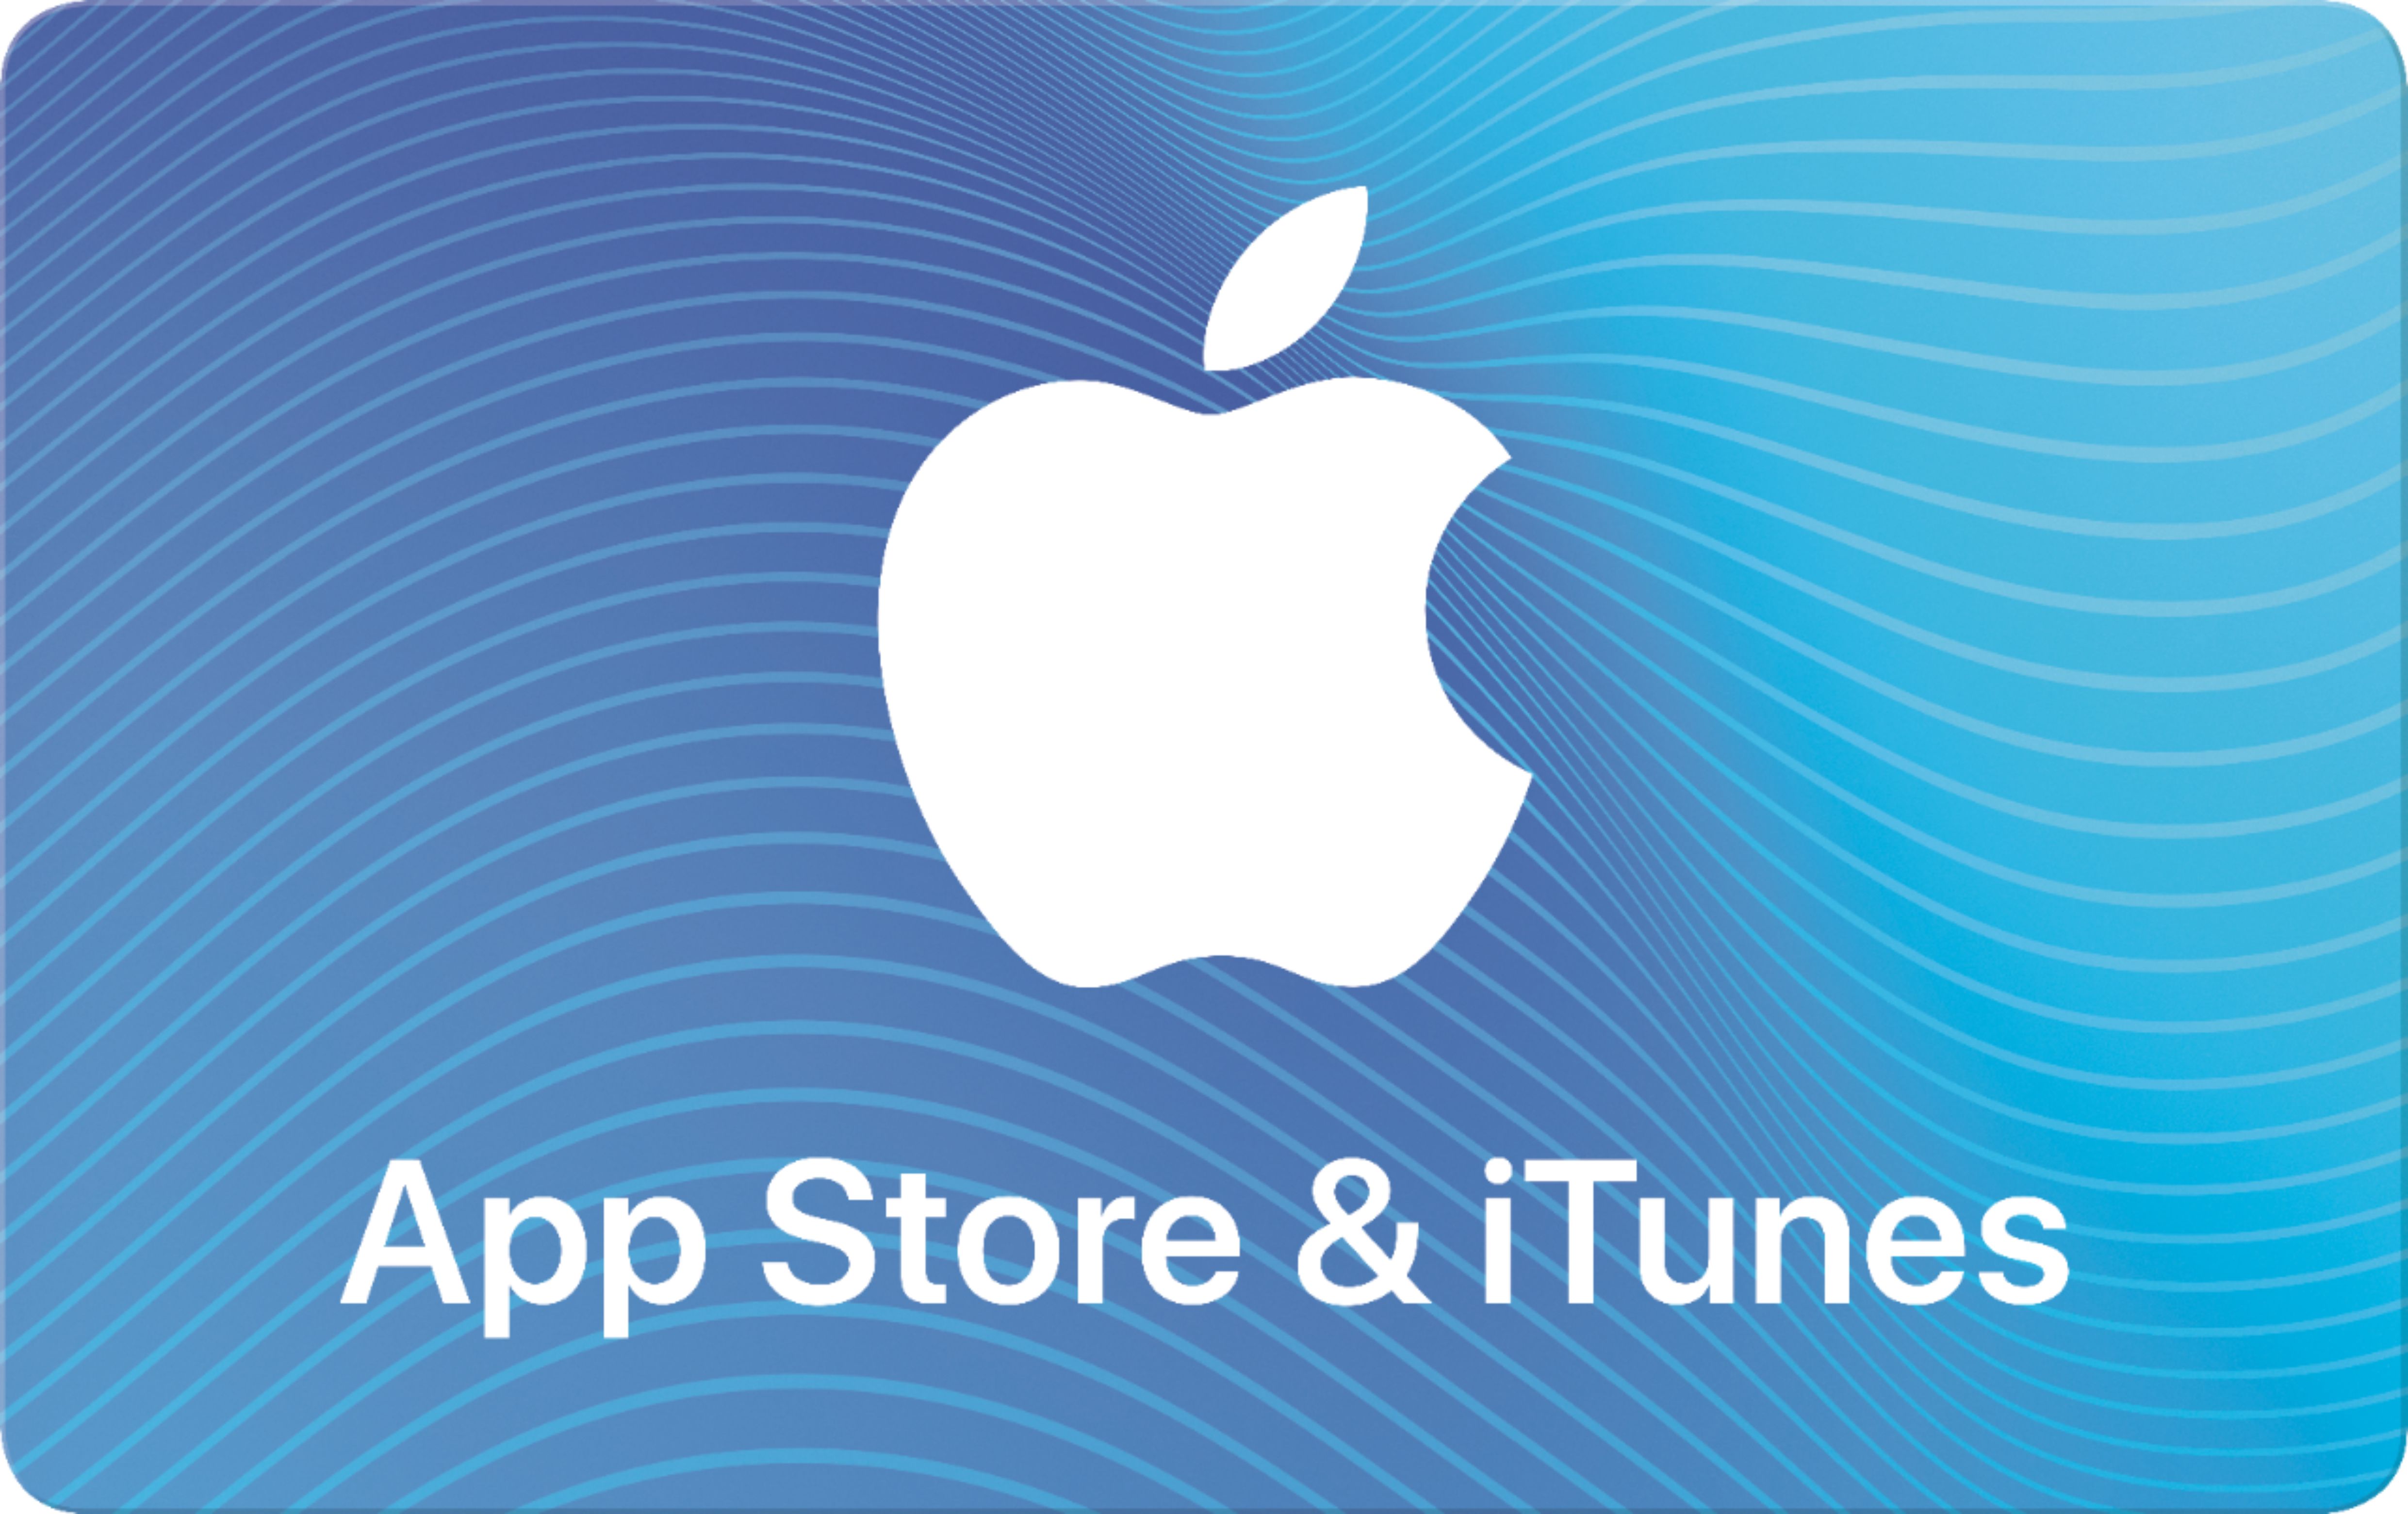 $15 App Store & iTunes Gift Card